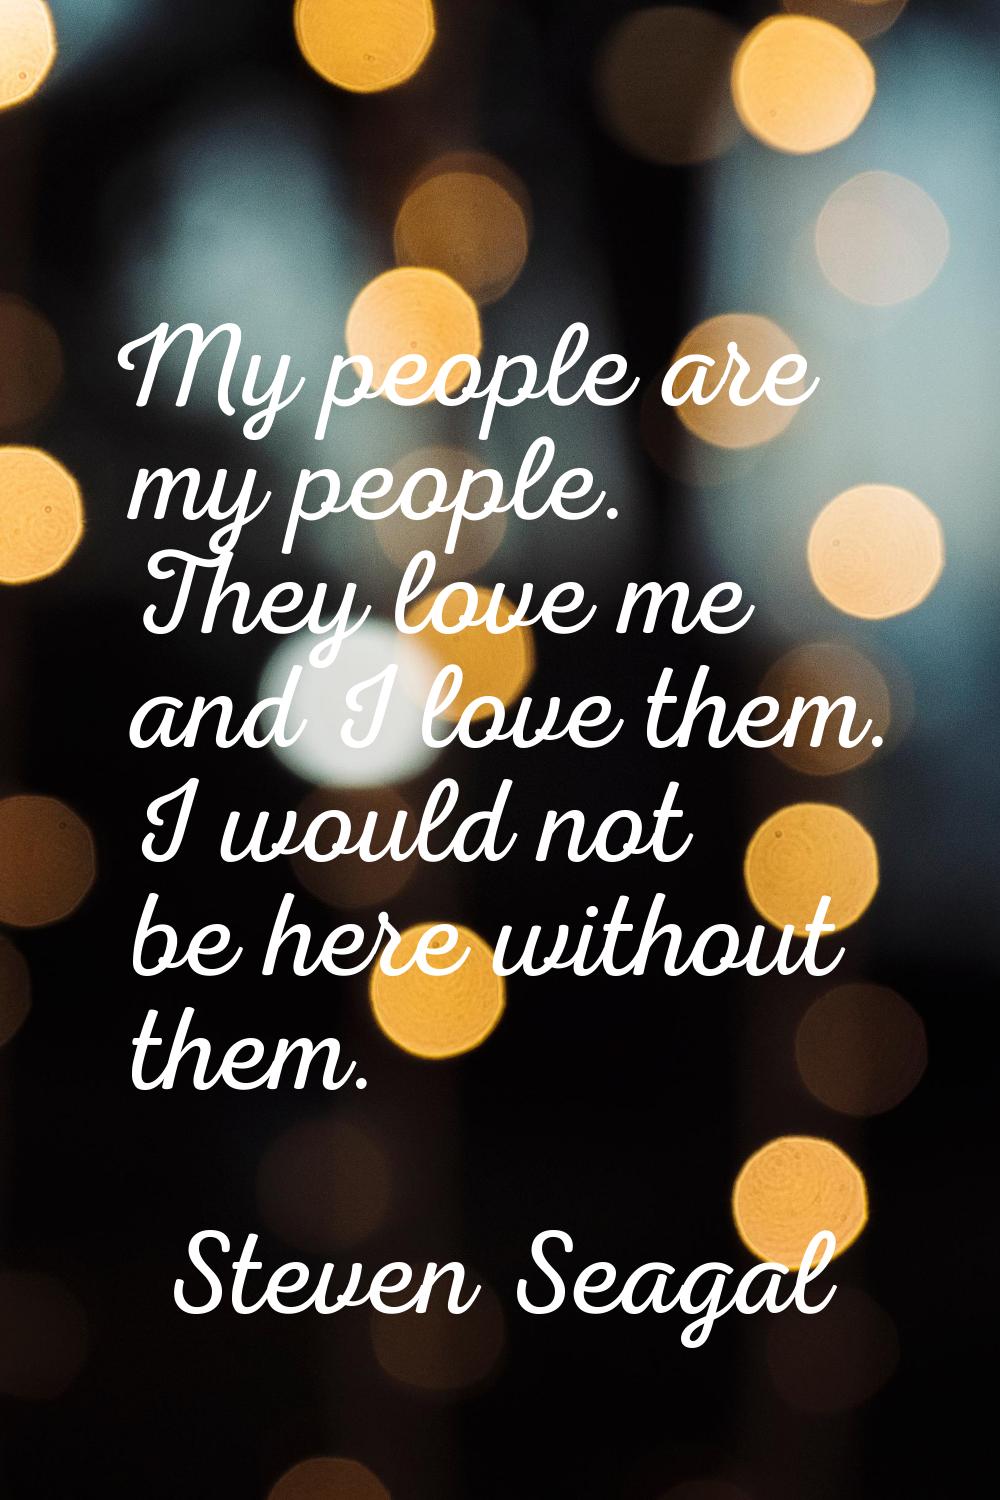 My people are my people. They love me and I love them. I would not be here without them.